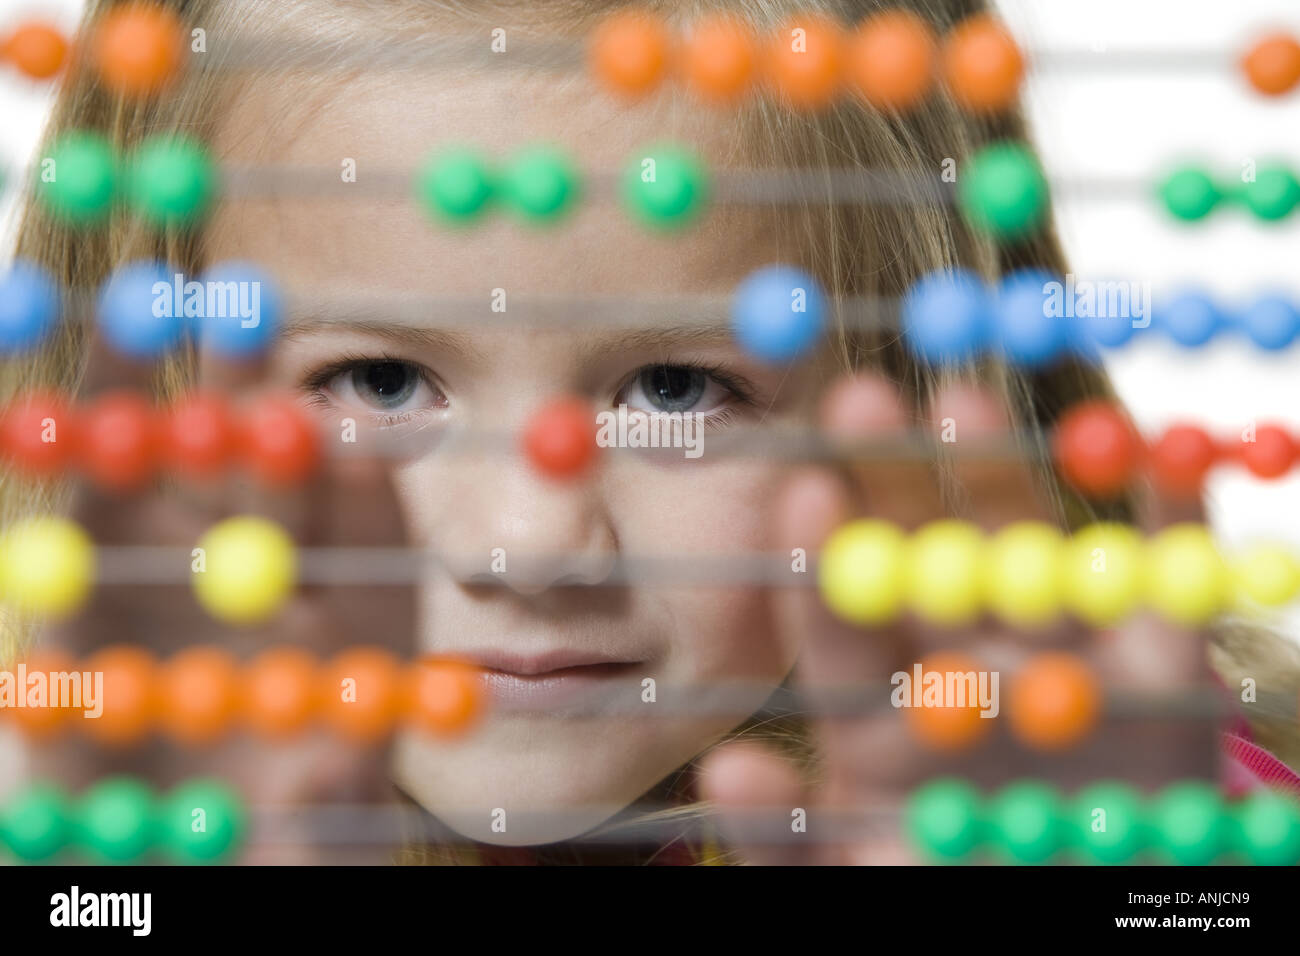 Portrait of a girl using an abacus Stock Photo